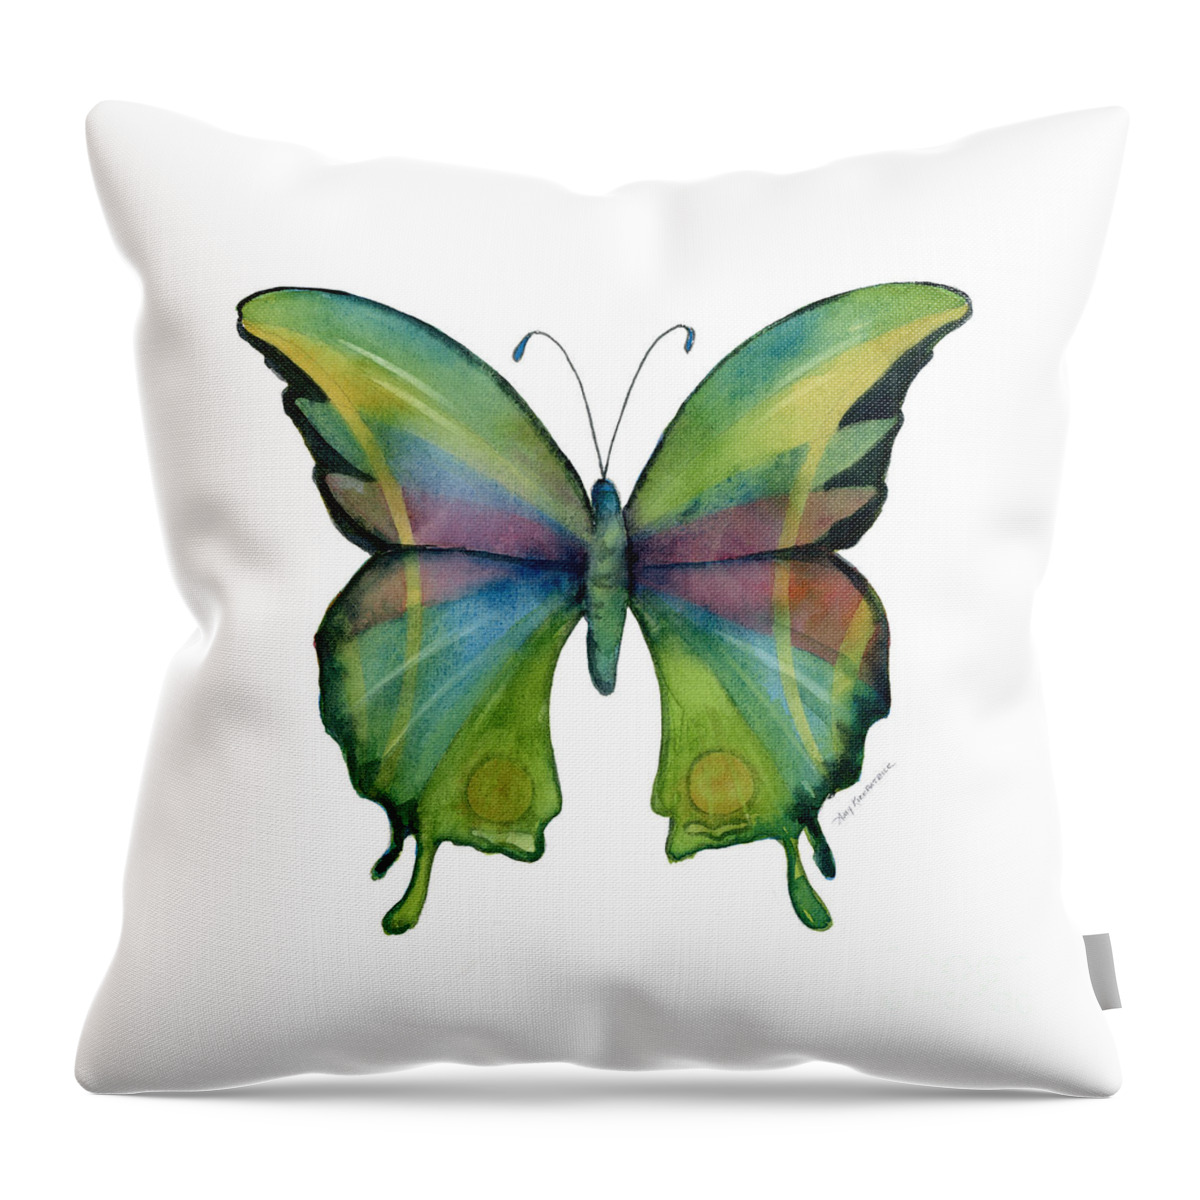 Prism Throw Pillow featuring the painting 11 Prism Butterfly by Amy Kirkpatrick